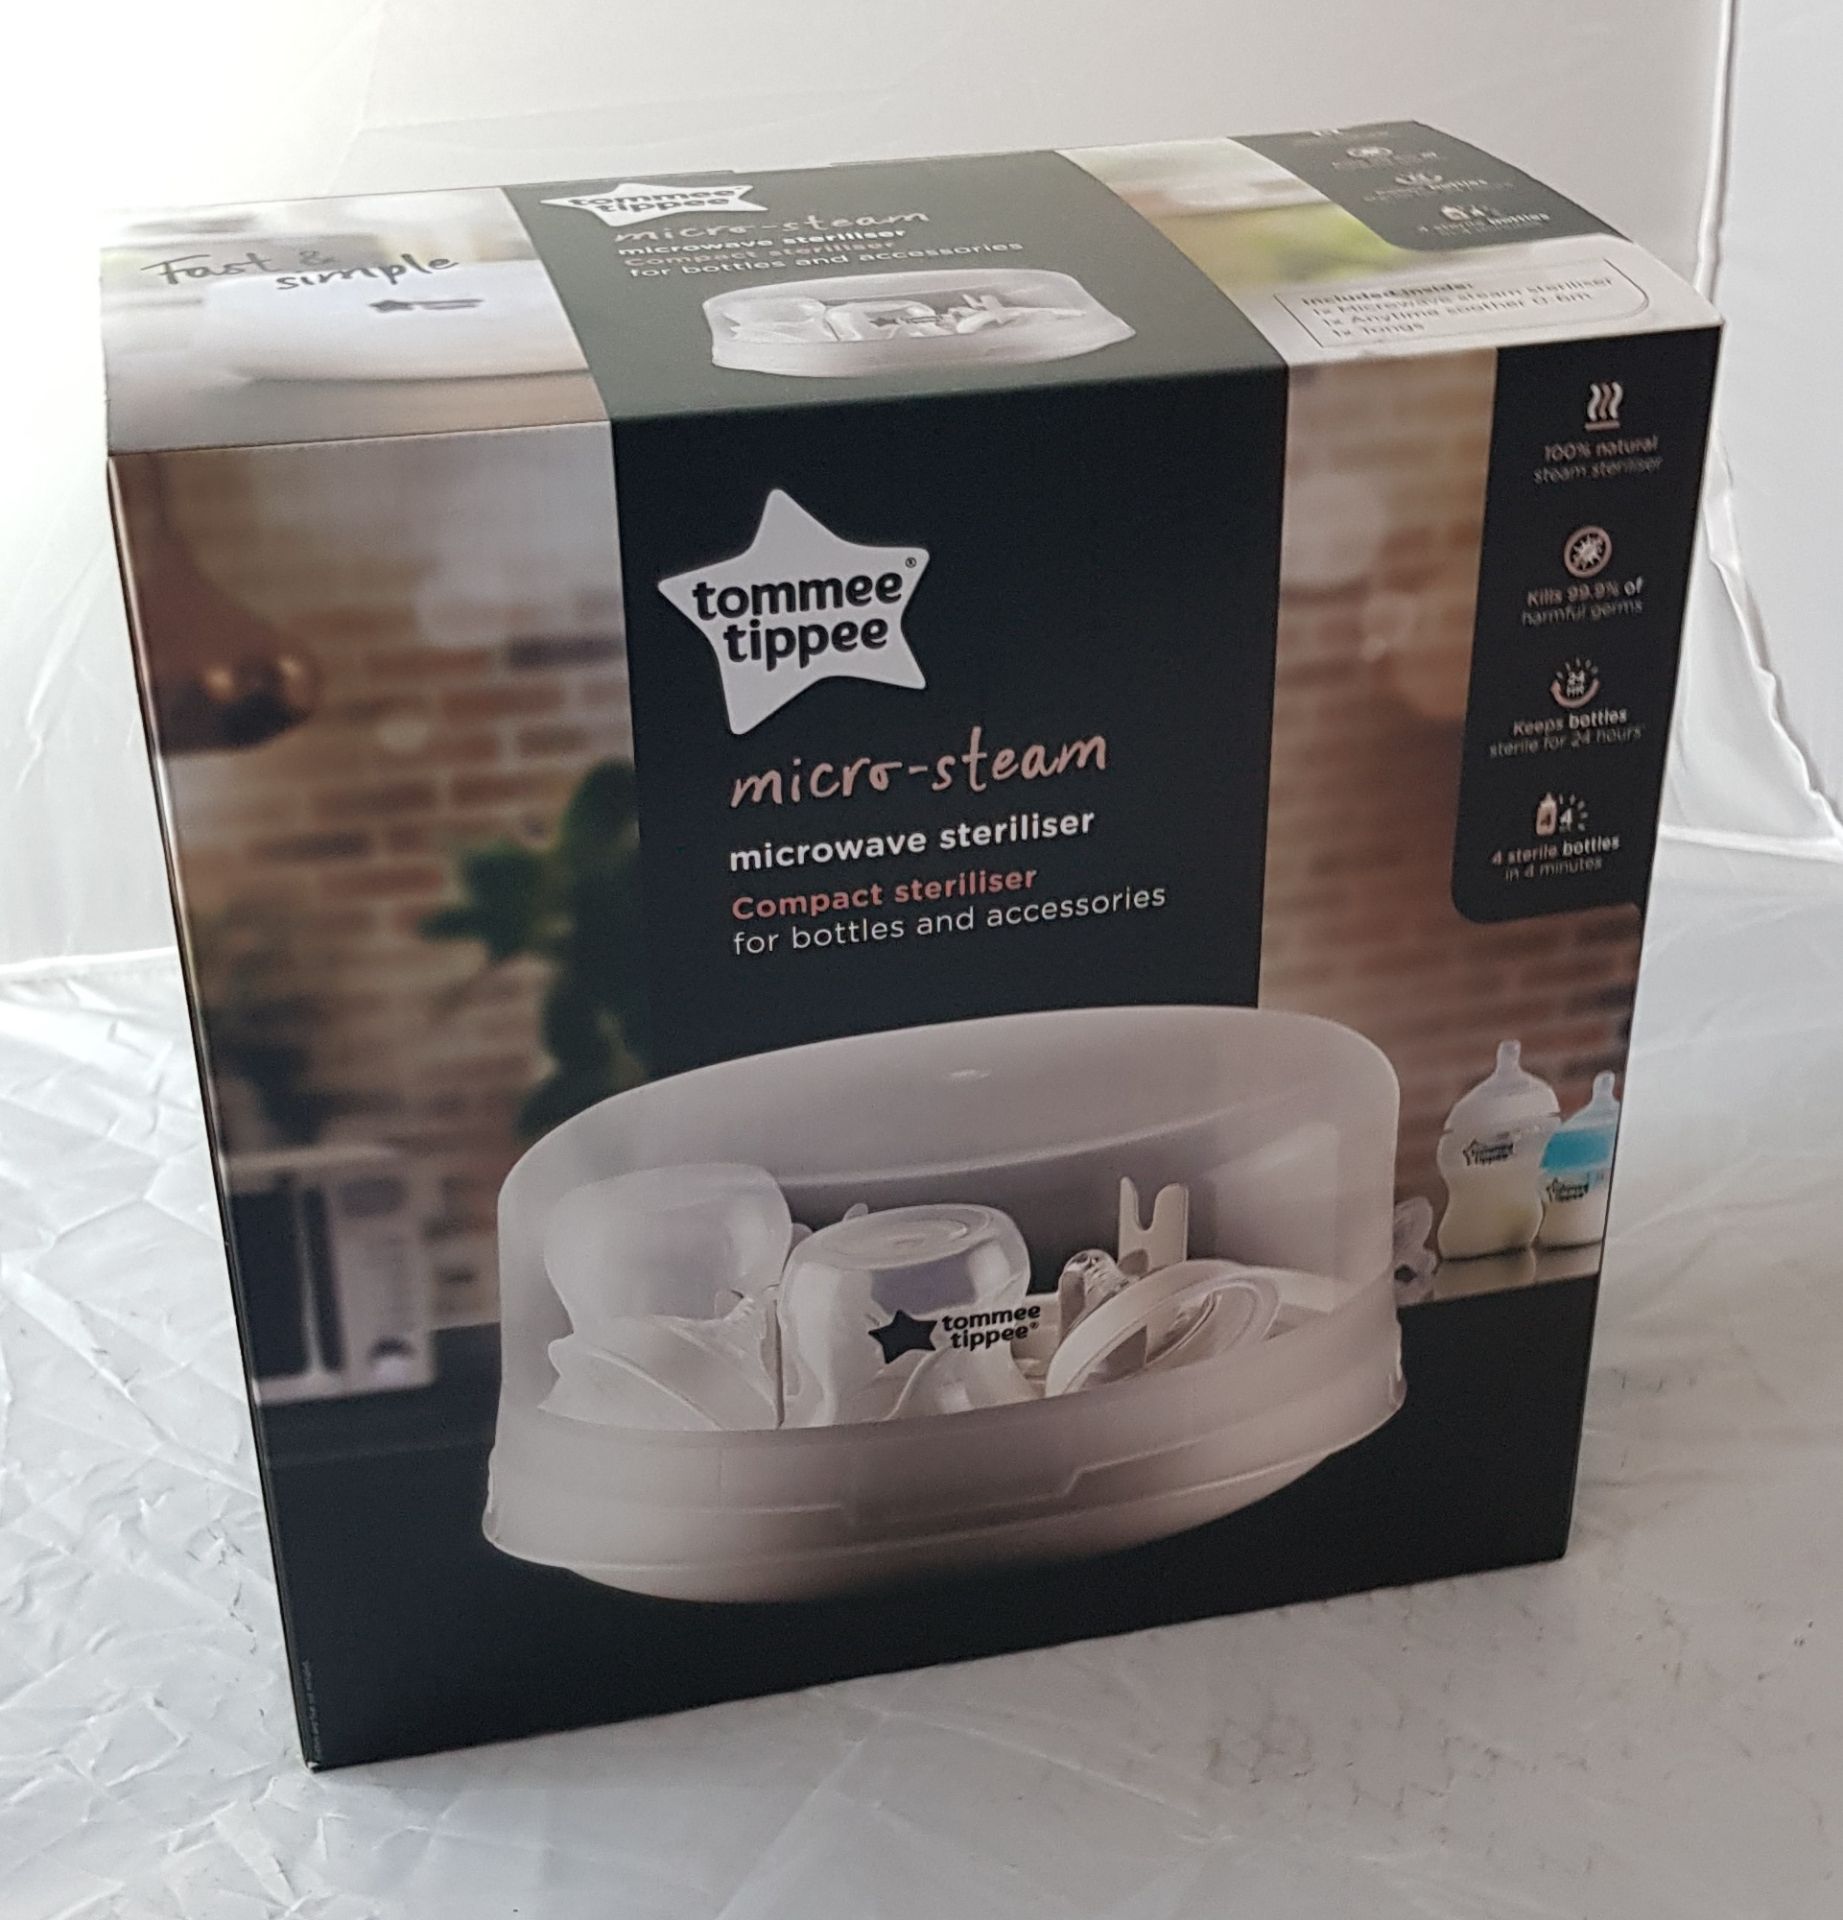 Tommee Tippee Micro Steam Microwave Steriliser. New, Sealed Product. No Guarantee Or Warranty I... - Image 2 of 2